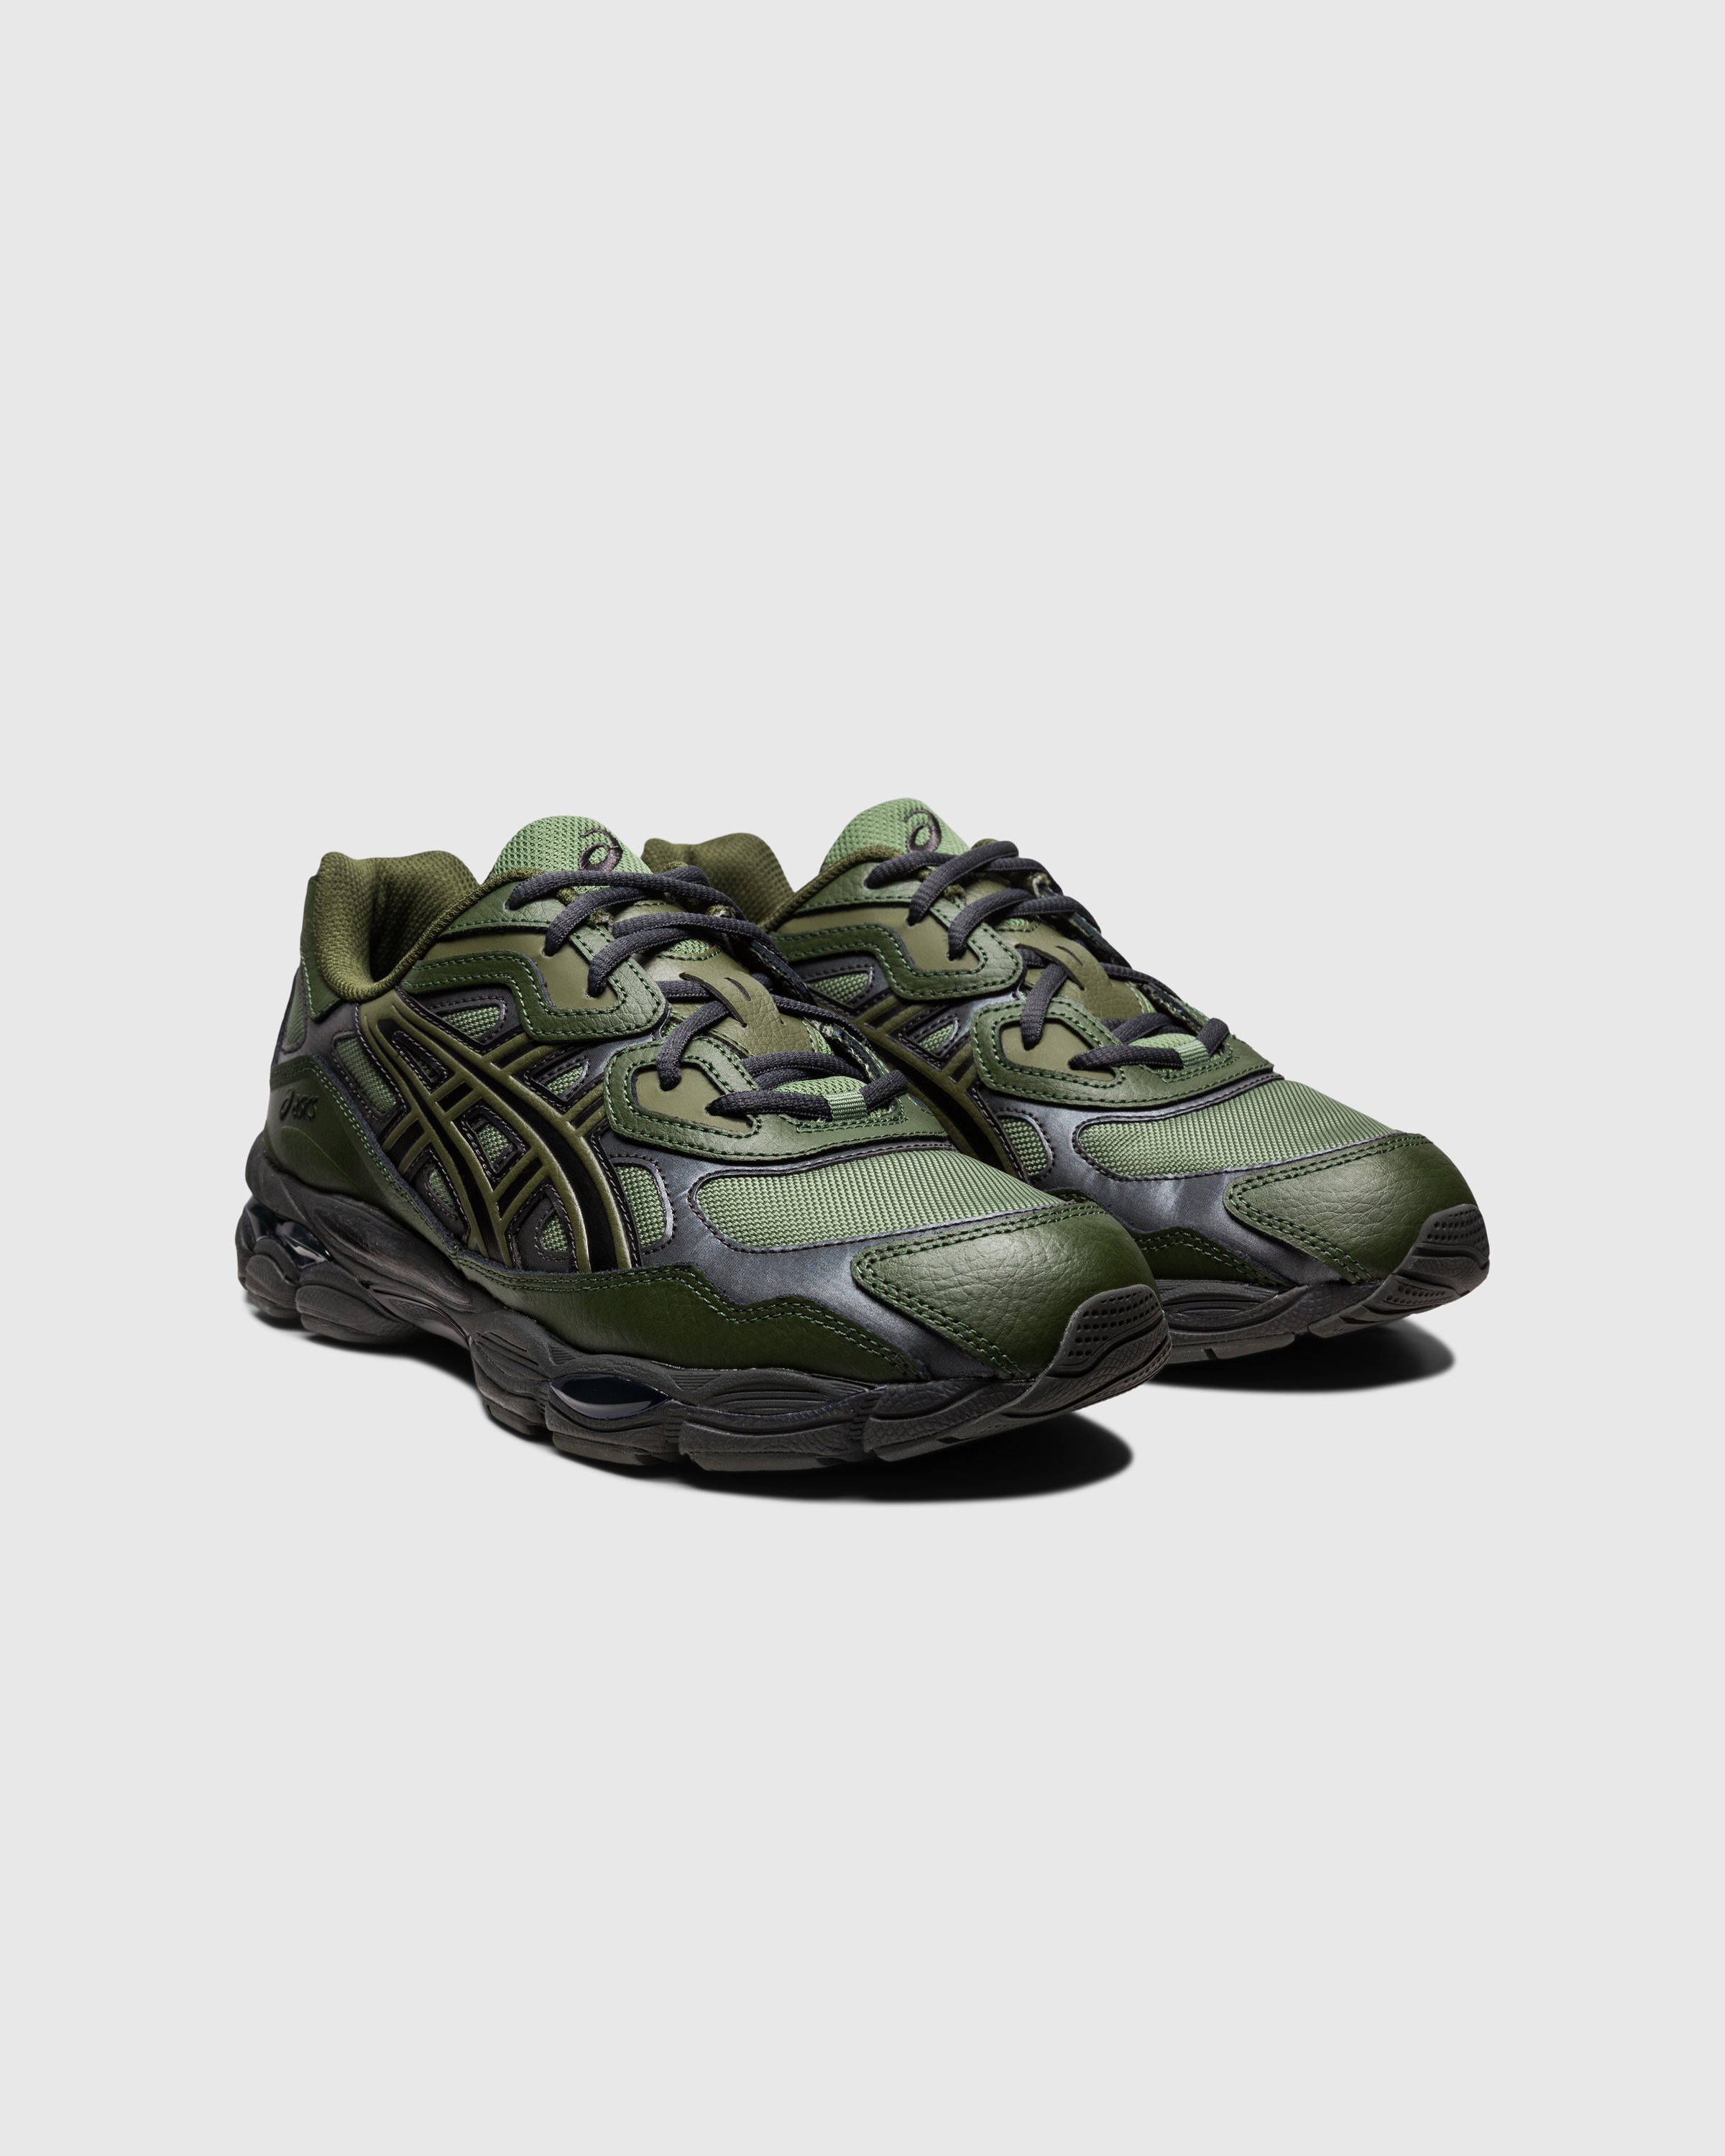 asics - GEL-NYC Moss/Forest - Footwear - Green - Image 3